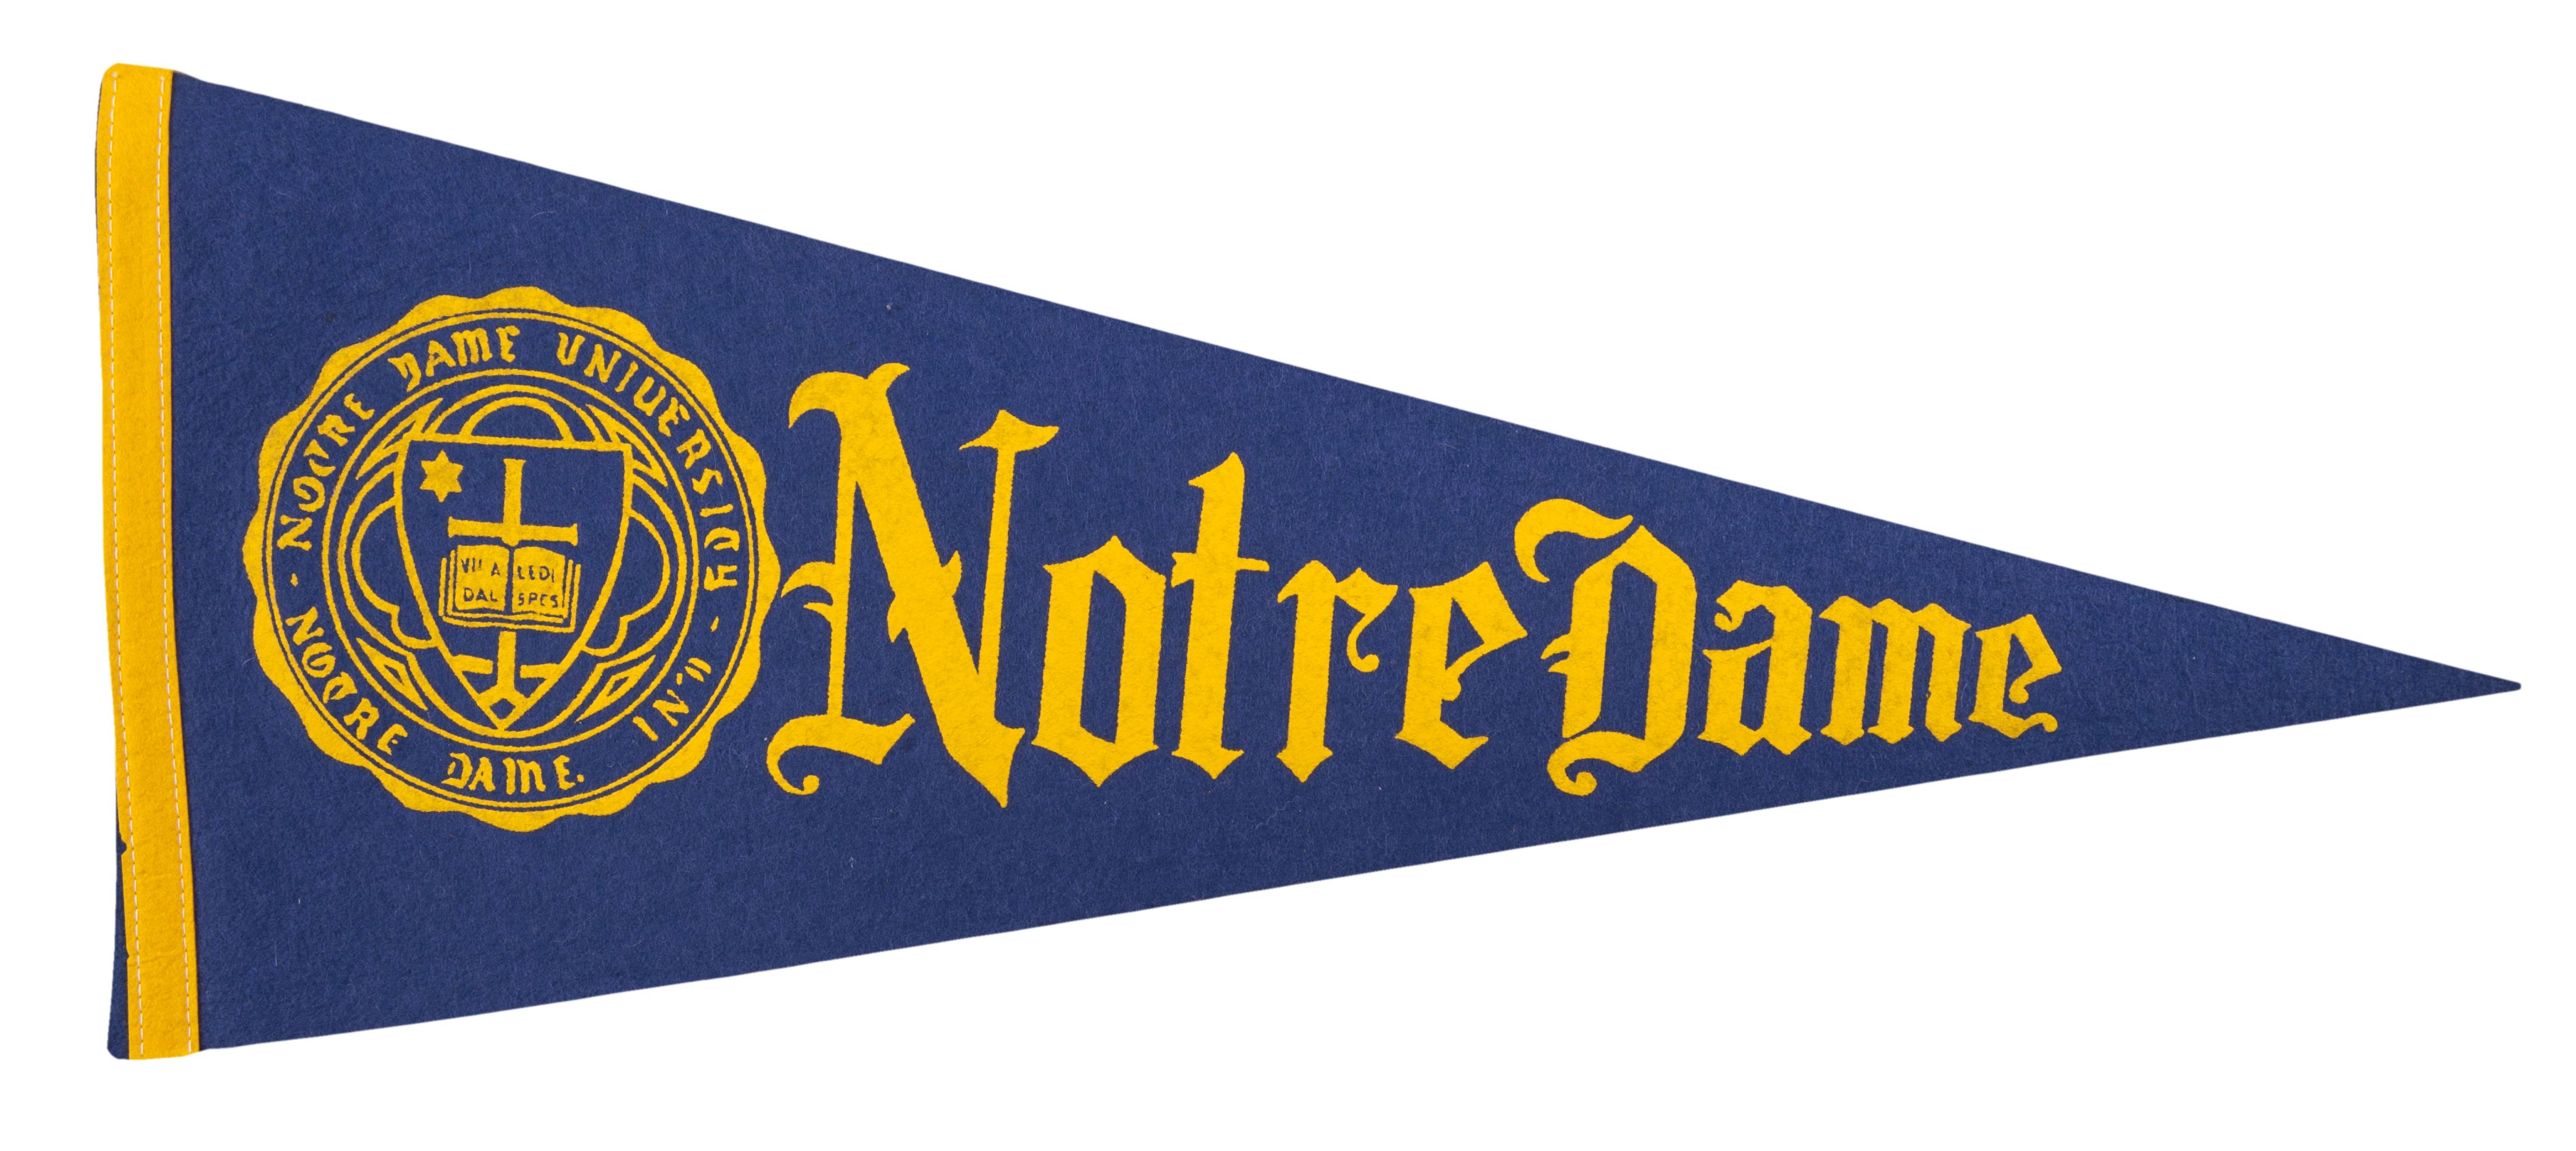 Lot Detail - 1980s Notre Dame Vintage Pennants Collection of 50